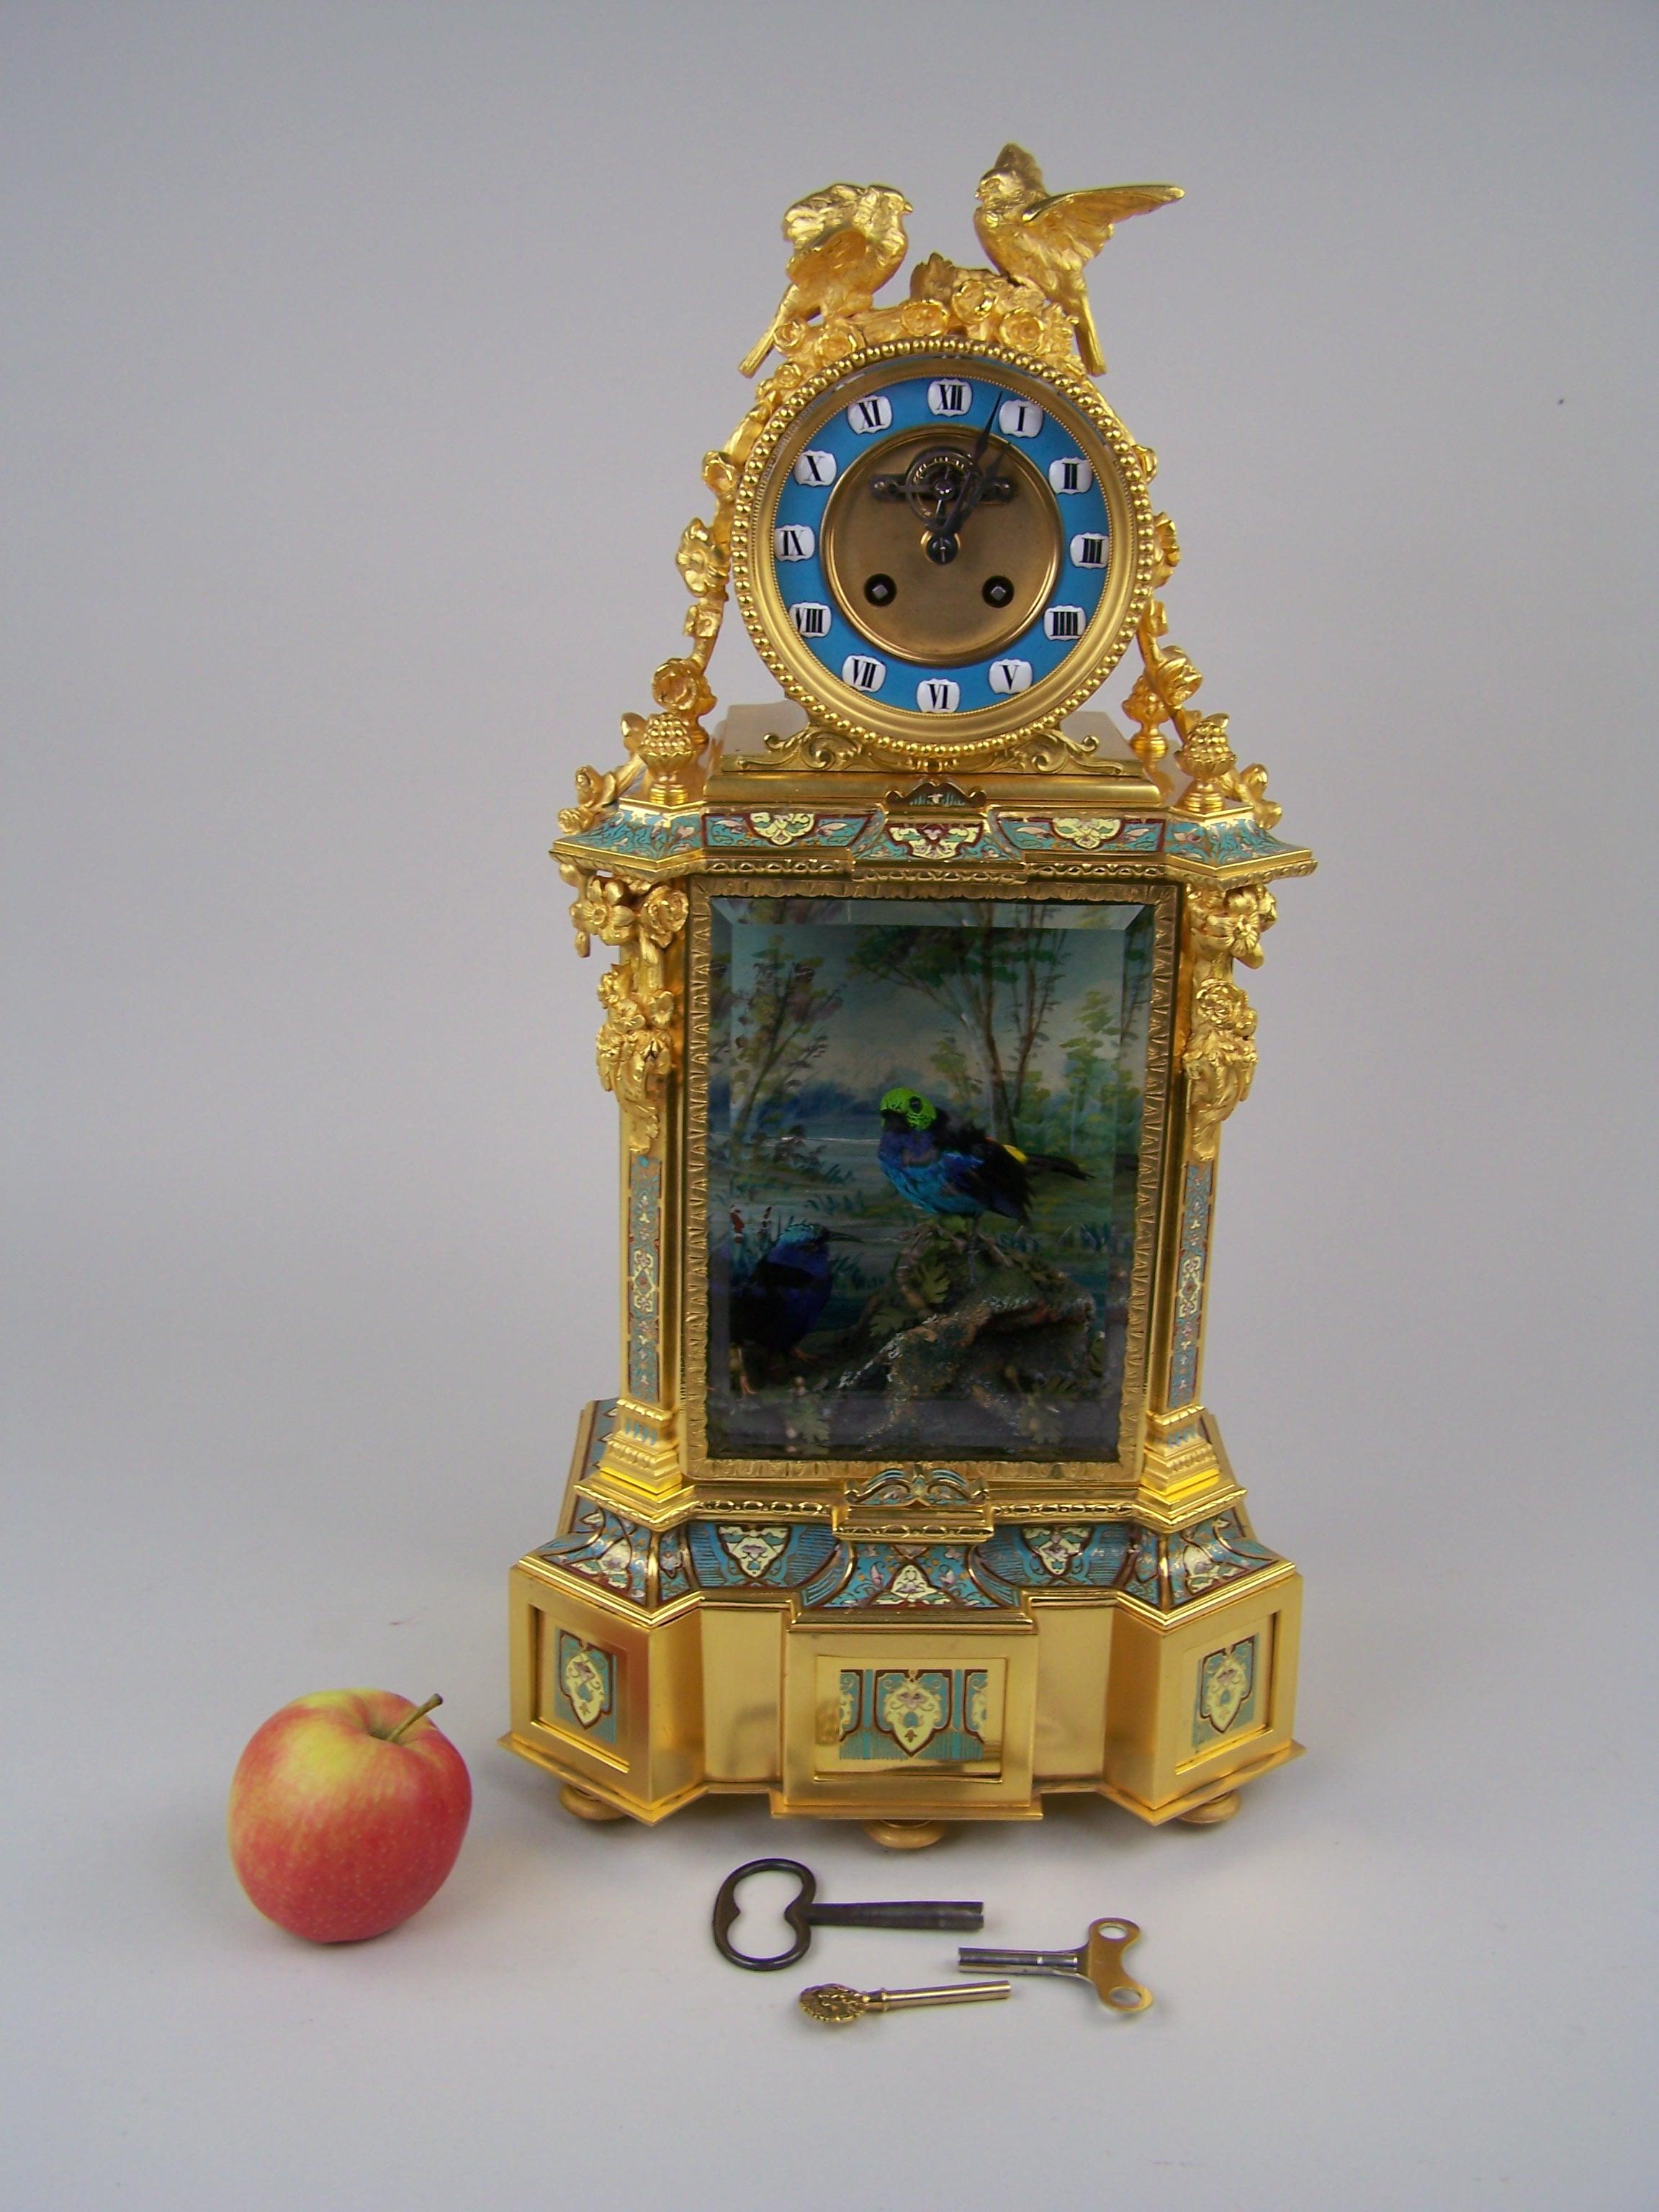 Very rare, one of a kind, clock made by Bontems in France at the end of the 19th century. 

It is an absolute Top-piece for Bontems because :

1. The luxurious case,
2. The rare escapement on the clock (no 2nd known with this escapement!!!).
3.